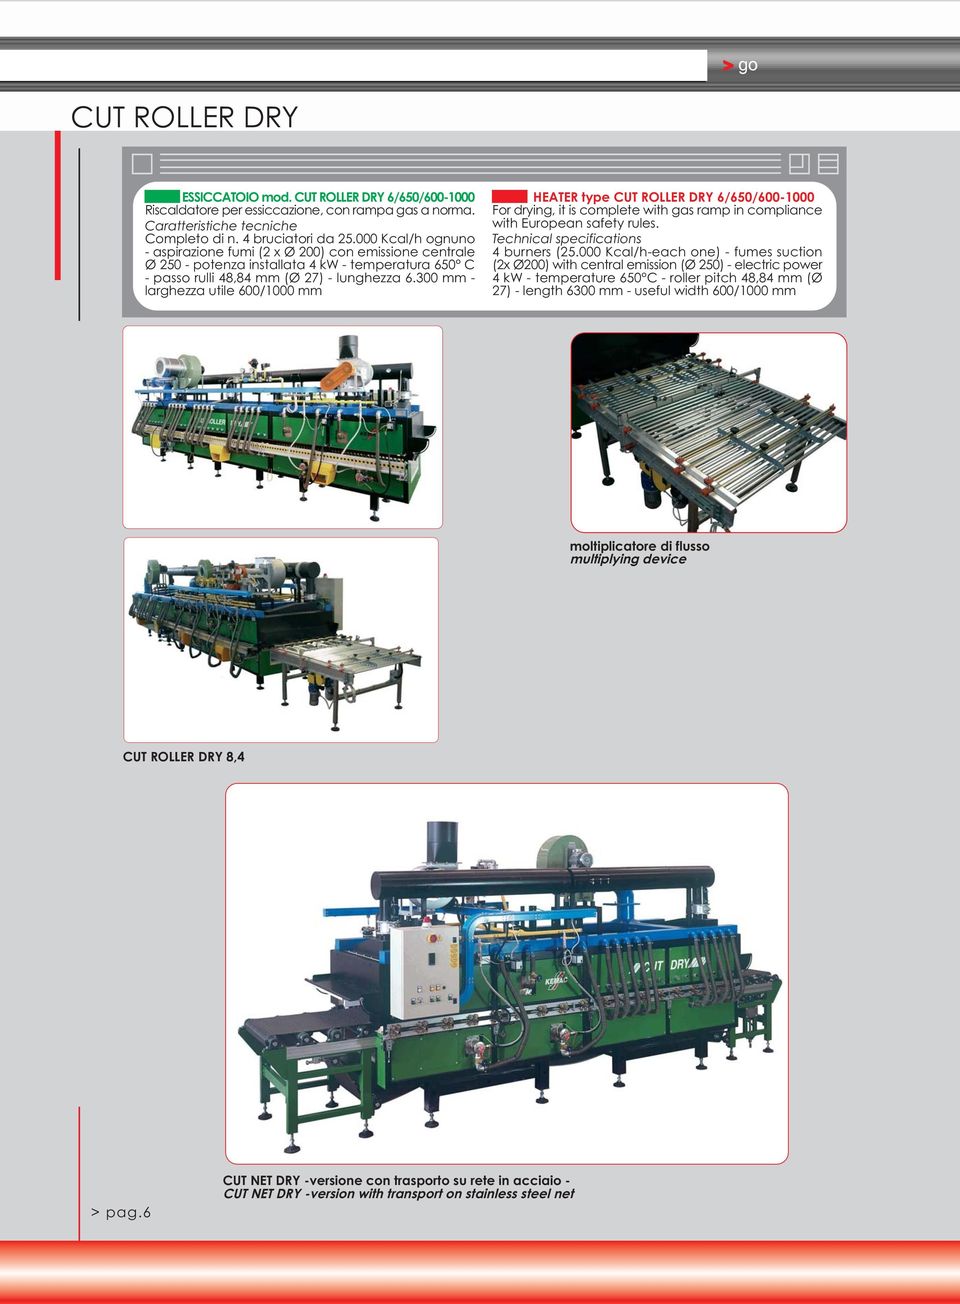 300 mm - larghezza utile 600/1000 mm HEATER type CUT ROLLER DRY 6/650/600-1000 For drying, it is complete with gas ramp in compliance with European safety rules. 4 burners (25.